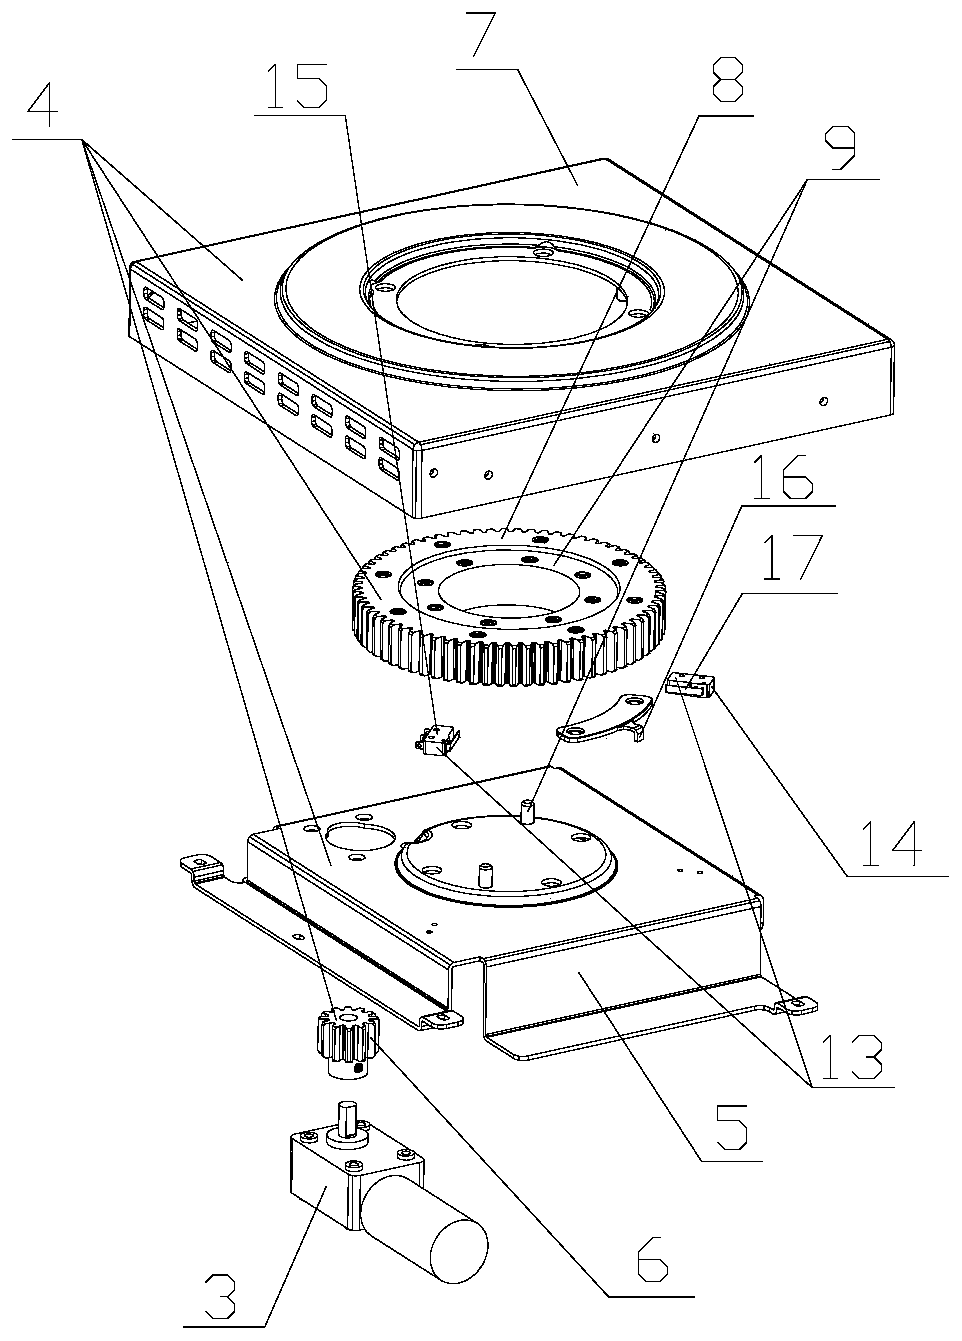 Mounting structure for liquid crystal display television